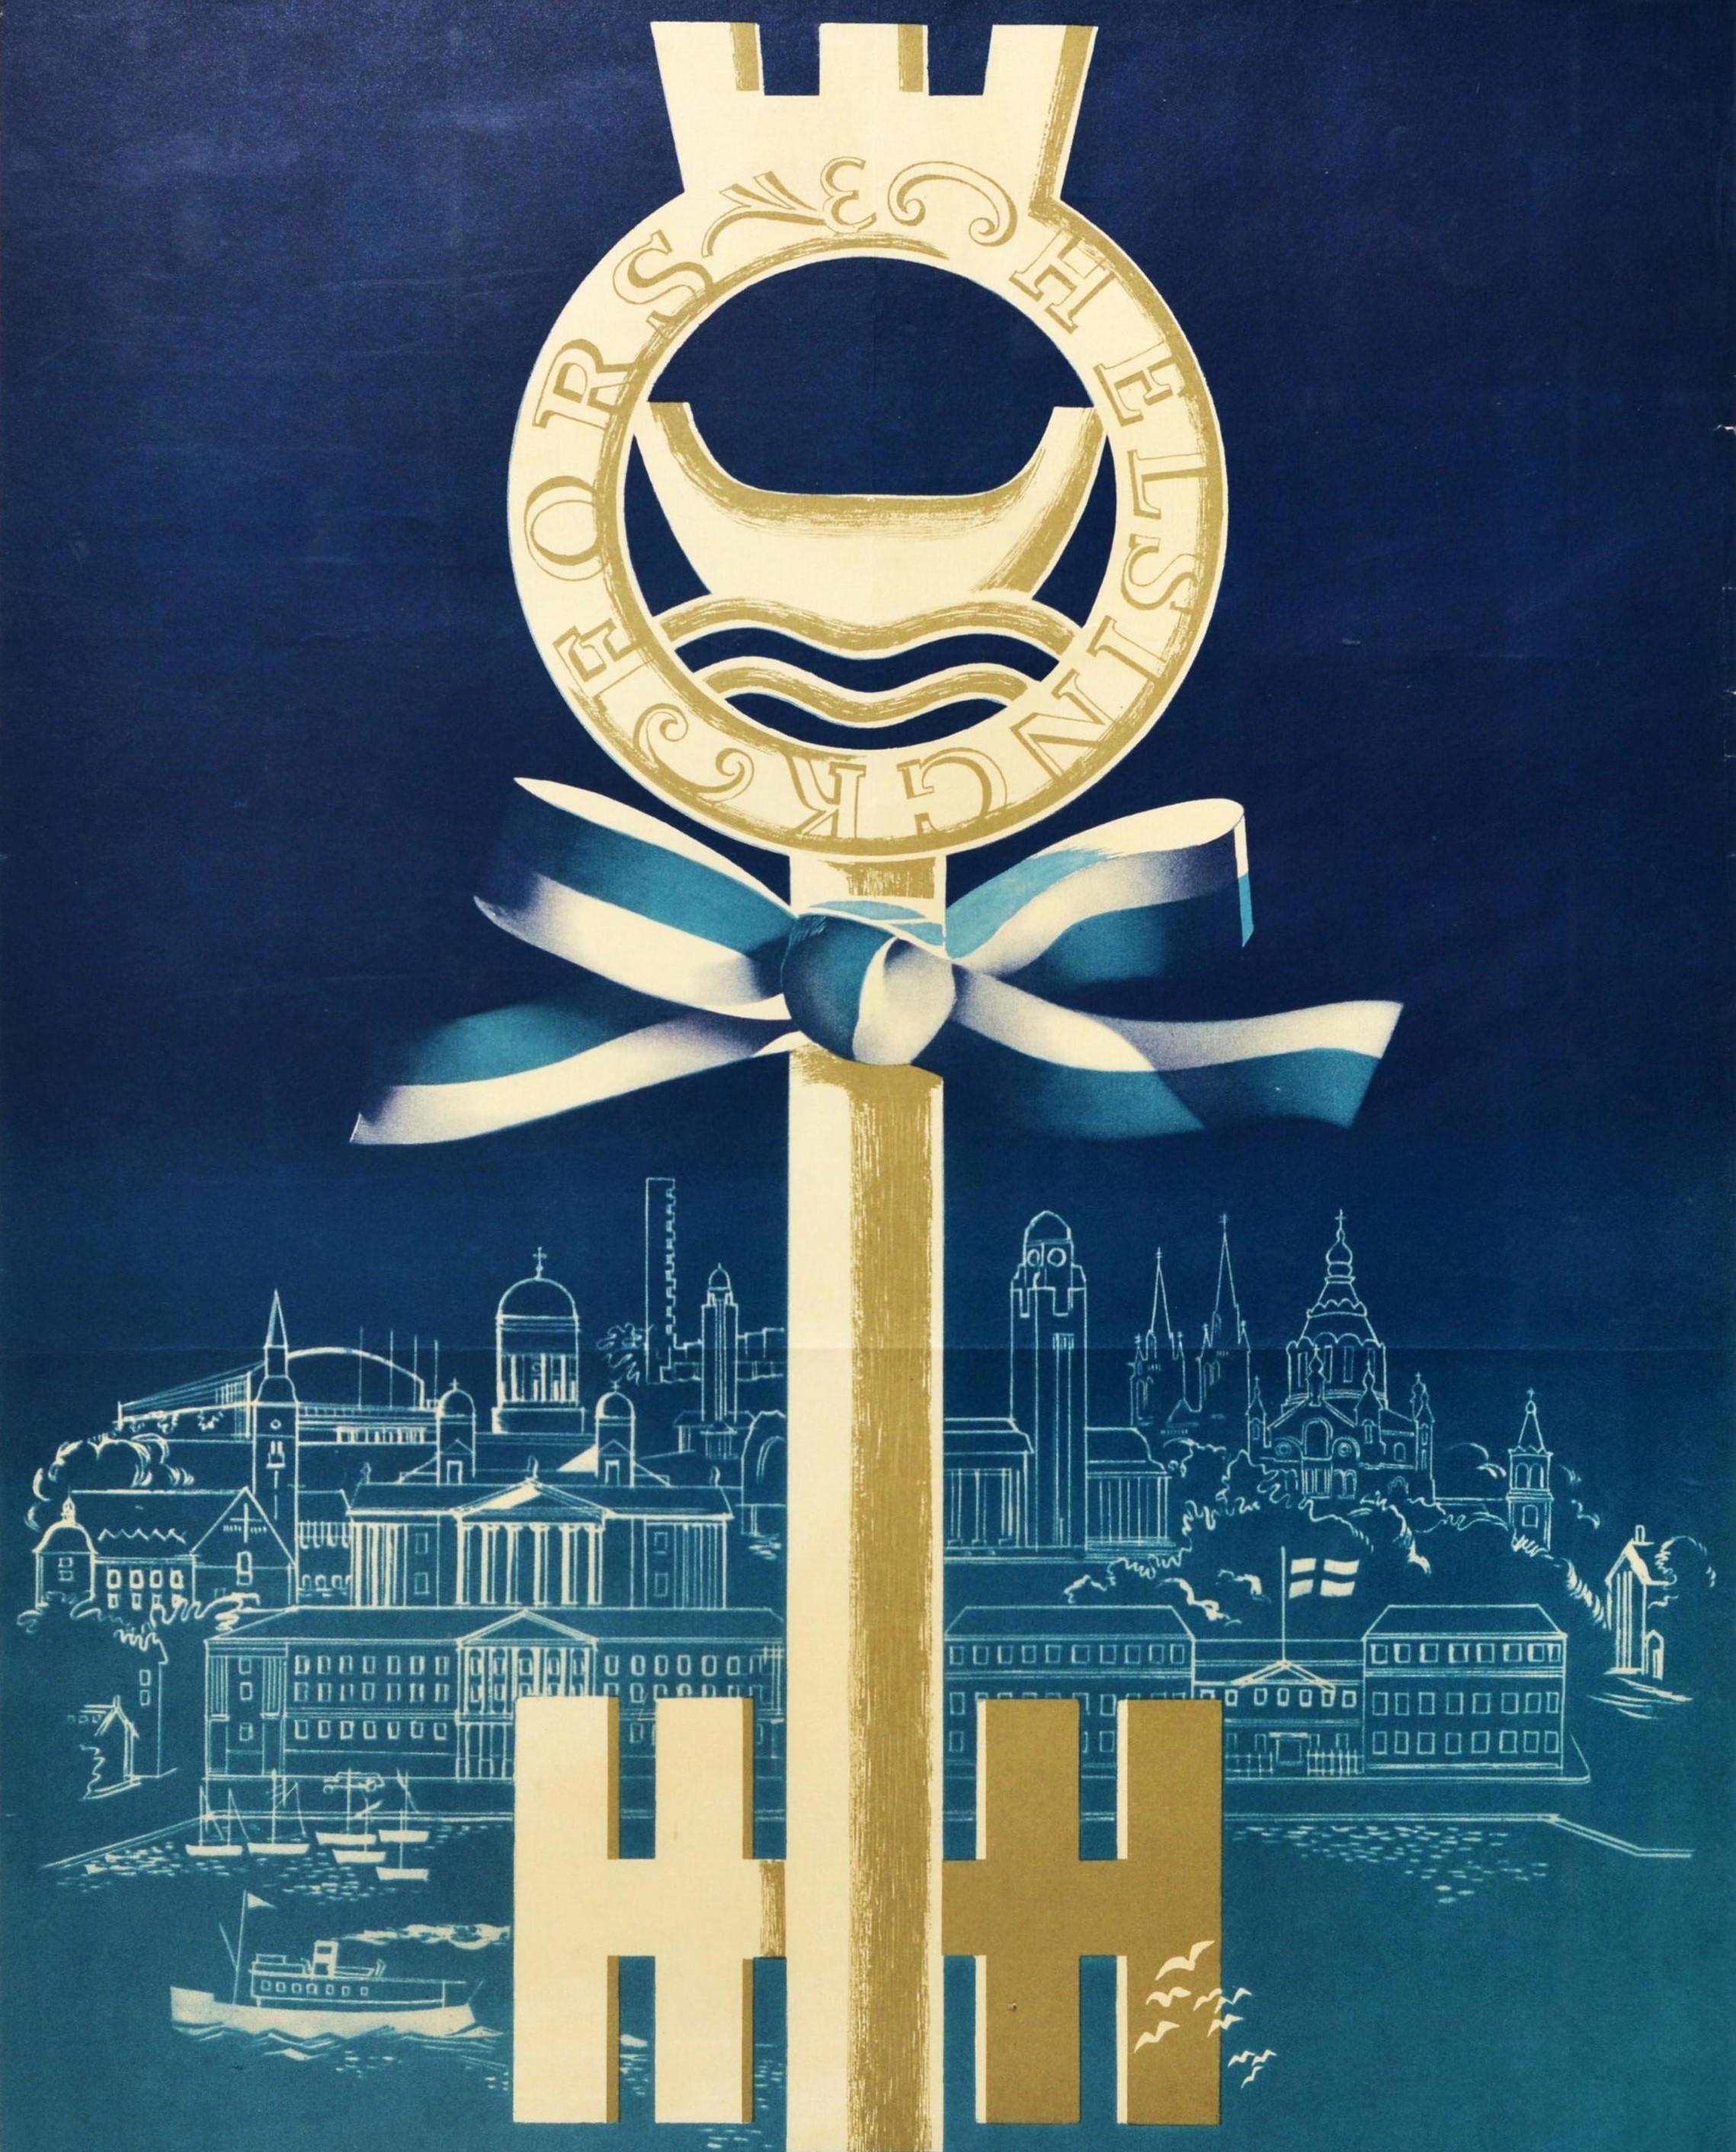 Mid-20th Century Original Vintage Poster Helsinki 400 Years Finland City Key Industry Fair Travel For Sale